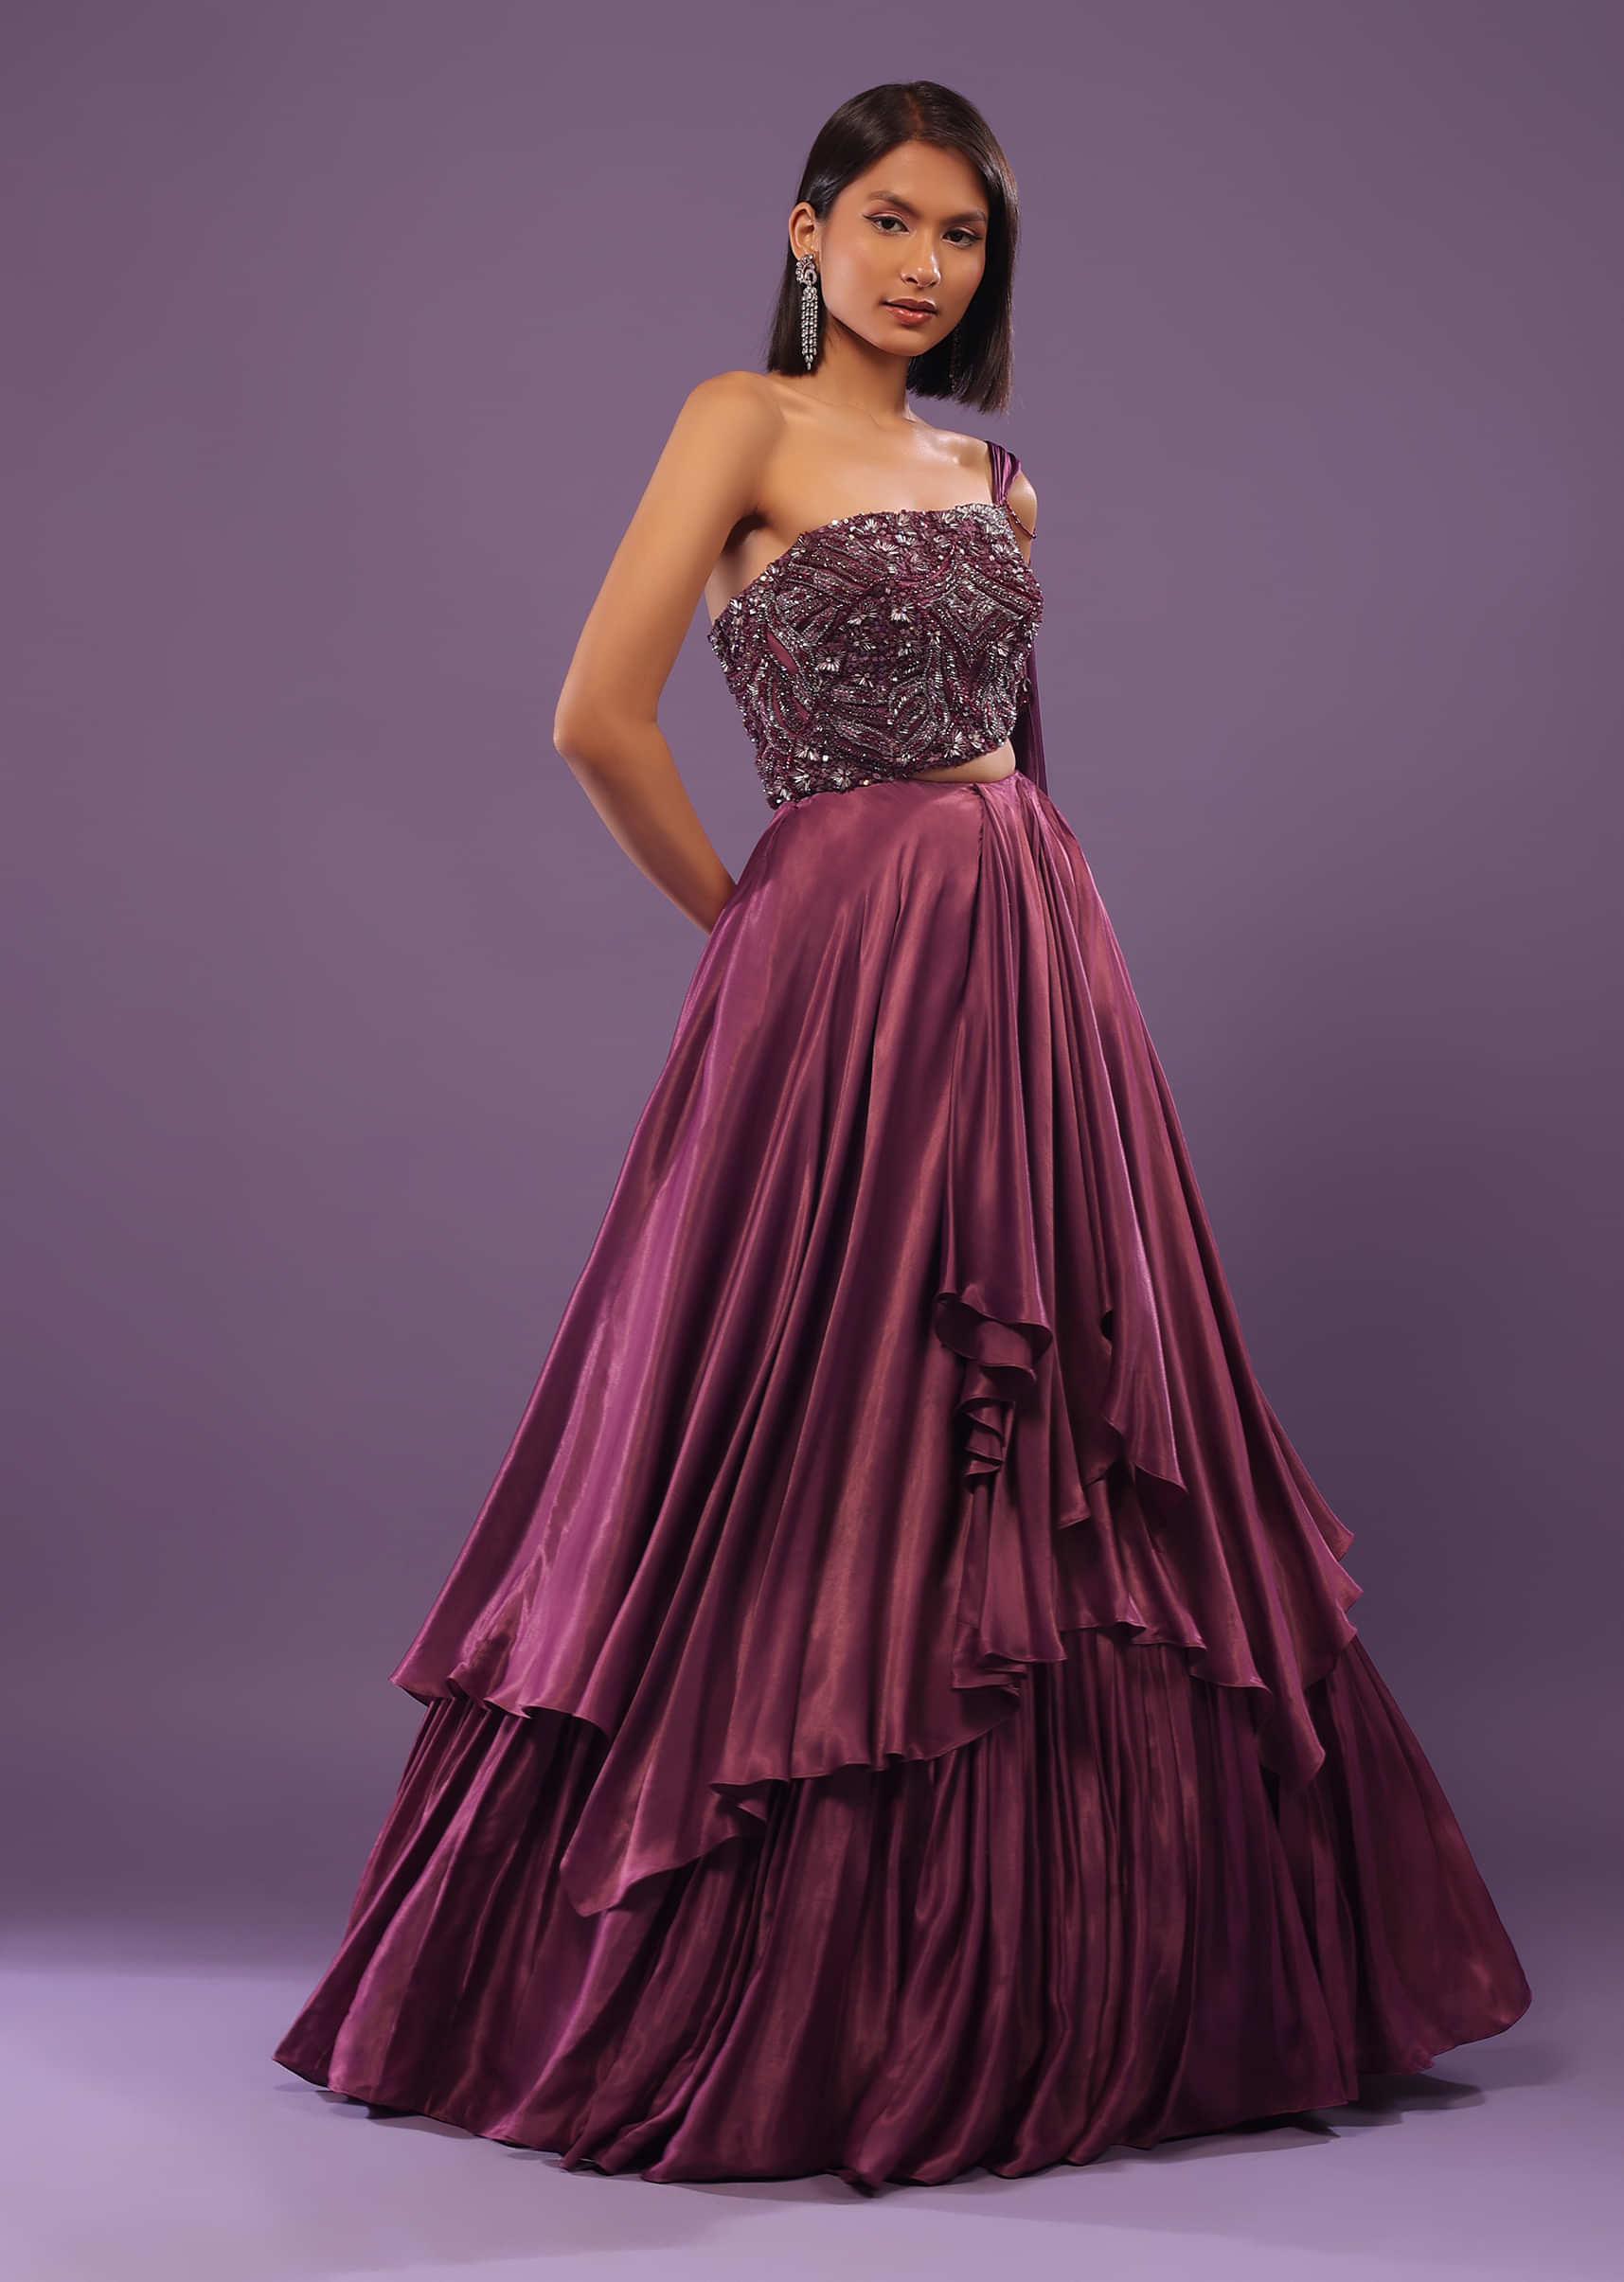 G131 New Purple Satin Off Shoulder Ball gown Size XS30 to XL40   Style Icon wwwdressrentin